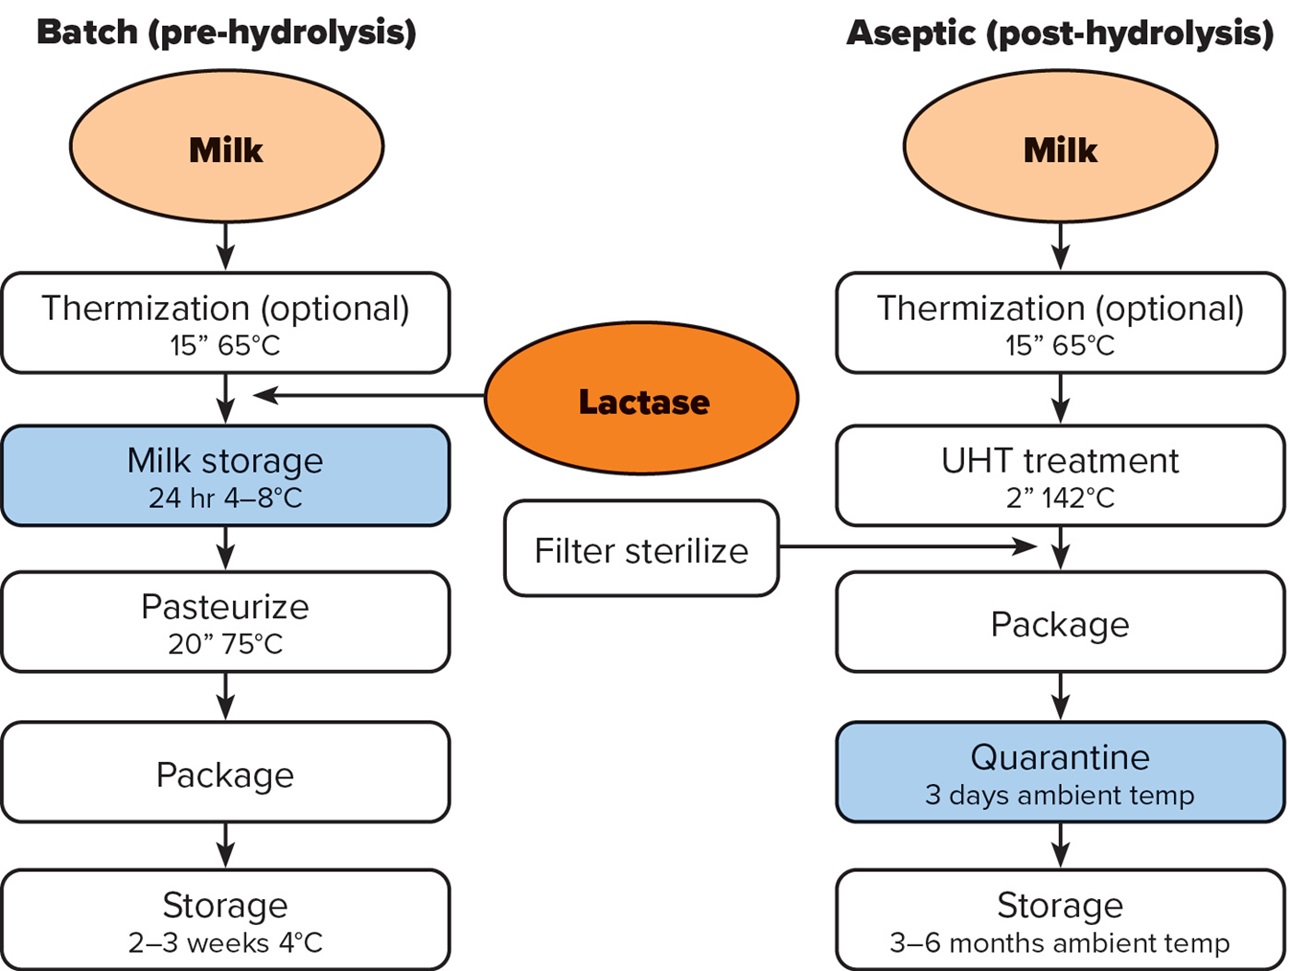 Figure 1. A schematic representation of the batch (left) and aseptic (right) processes that are used to produce lactose-free milk.